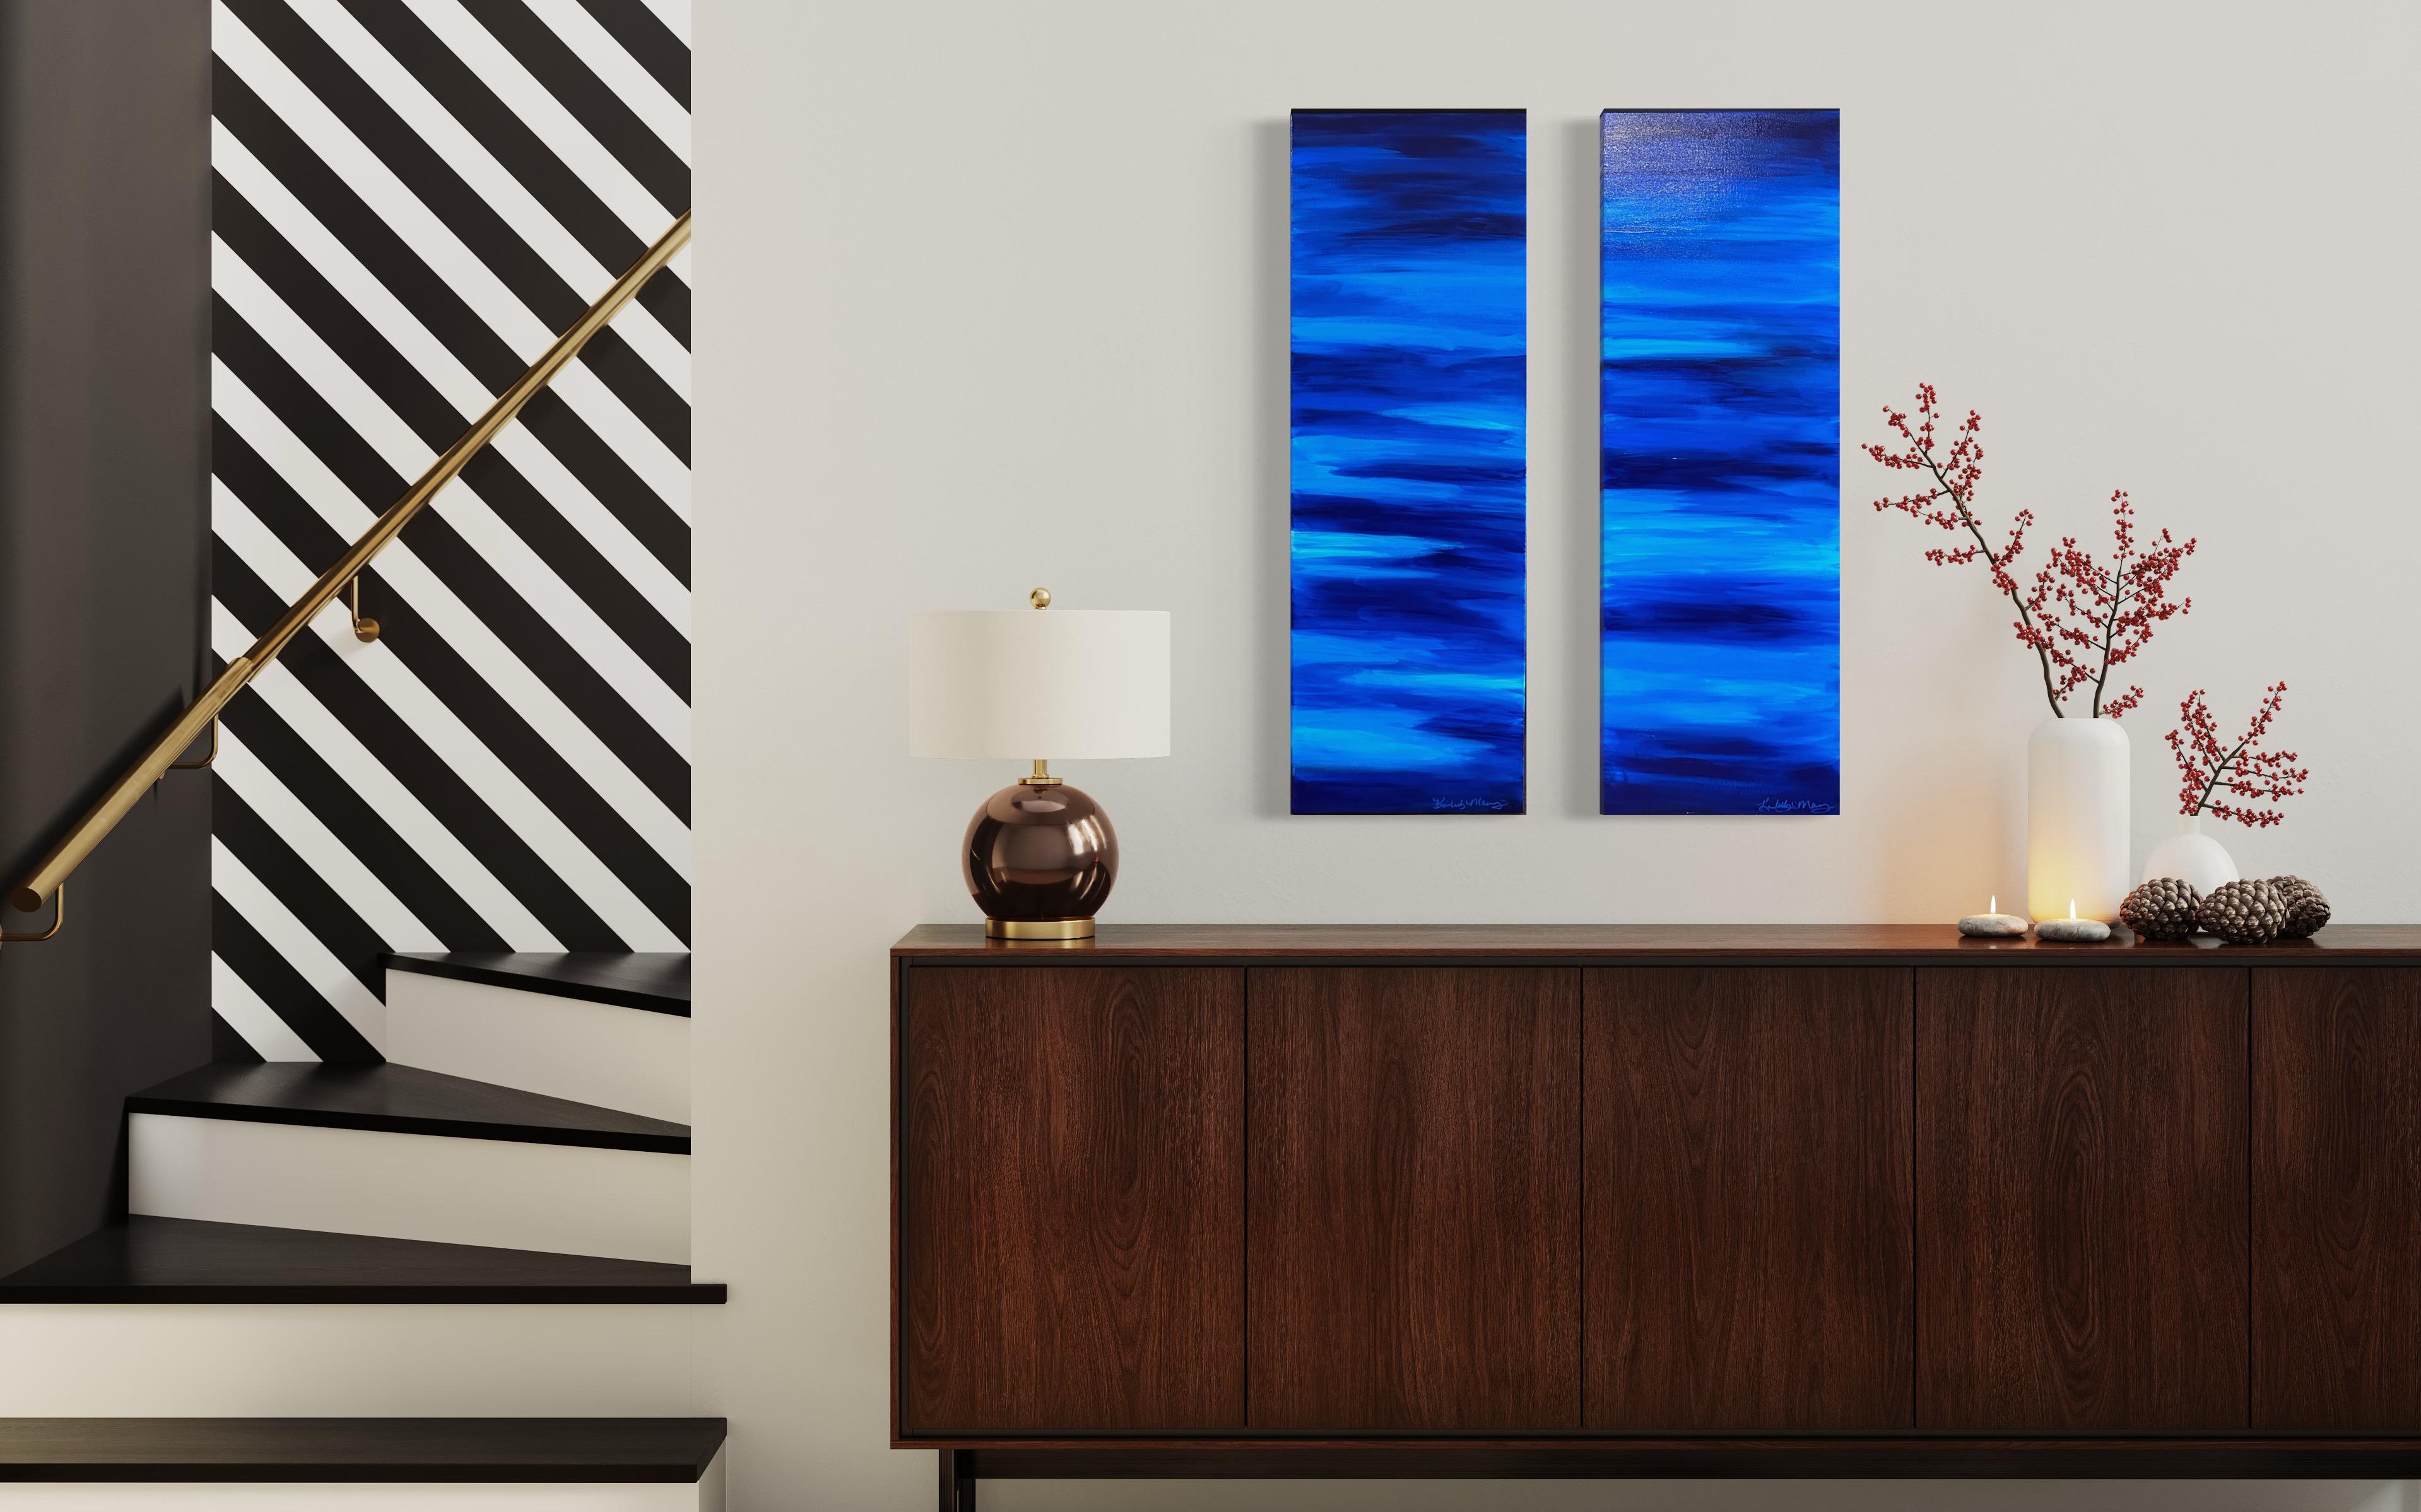 Kimberly Marney
Blue Horizon #2 (Blue, Abstract, Water, Landscape)
2023
Acrylic on Canvas
Size: 36x12x1.5in
Signed by hand
COA provided
Ref.: 924802-2009

Tags: Blue, Abstract, Water, Landscape

Layers of blues blend to create an abstraction